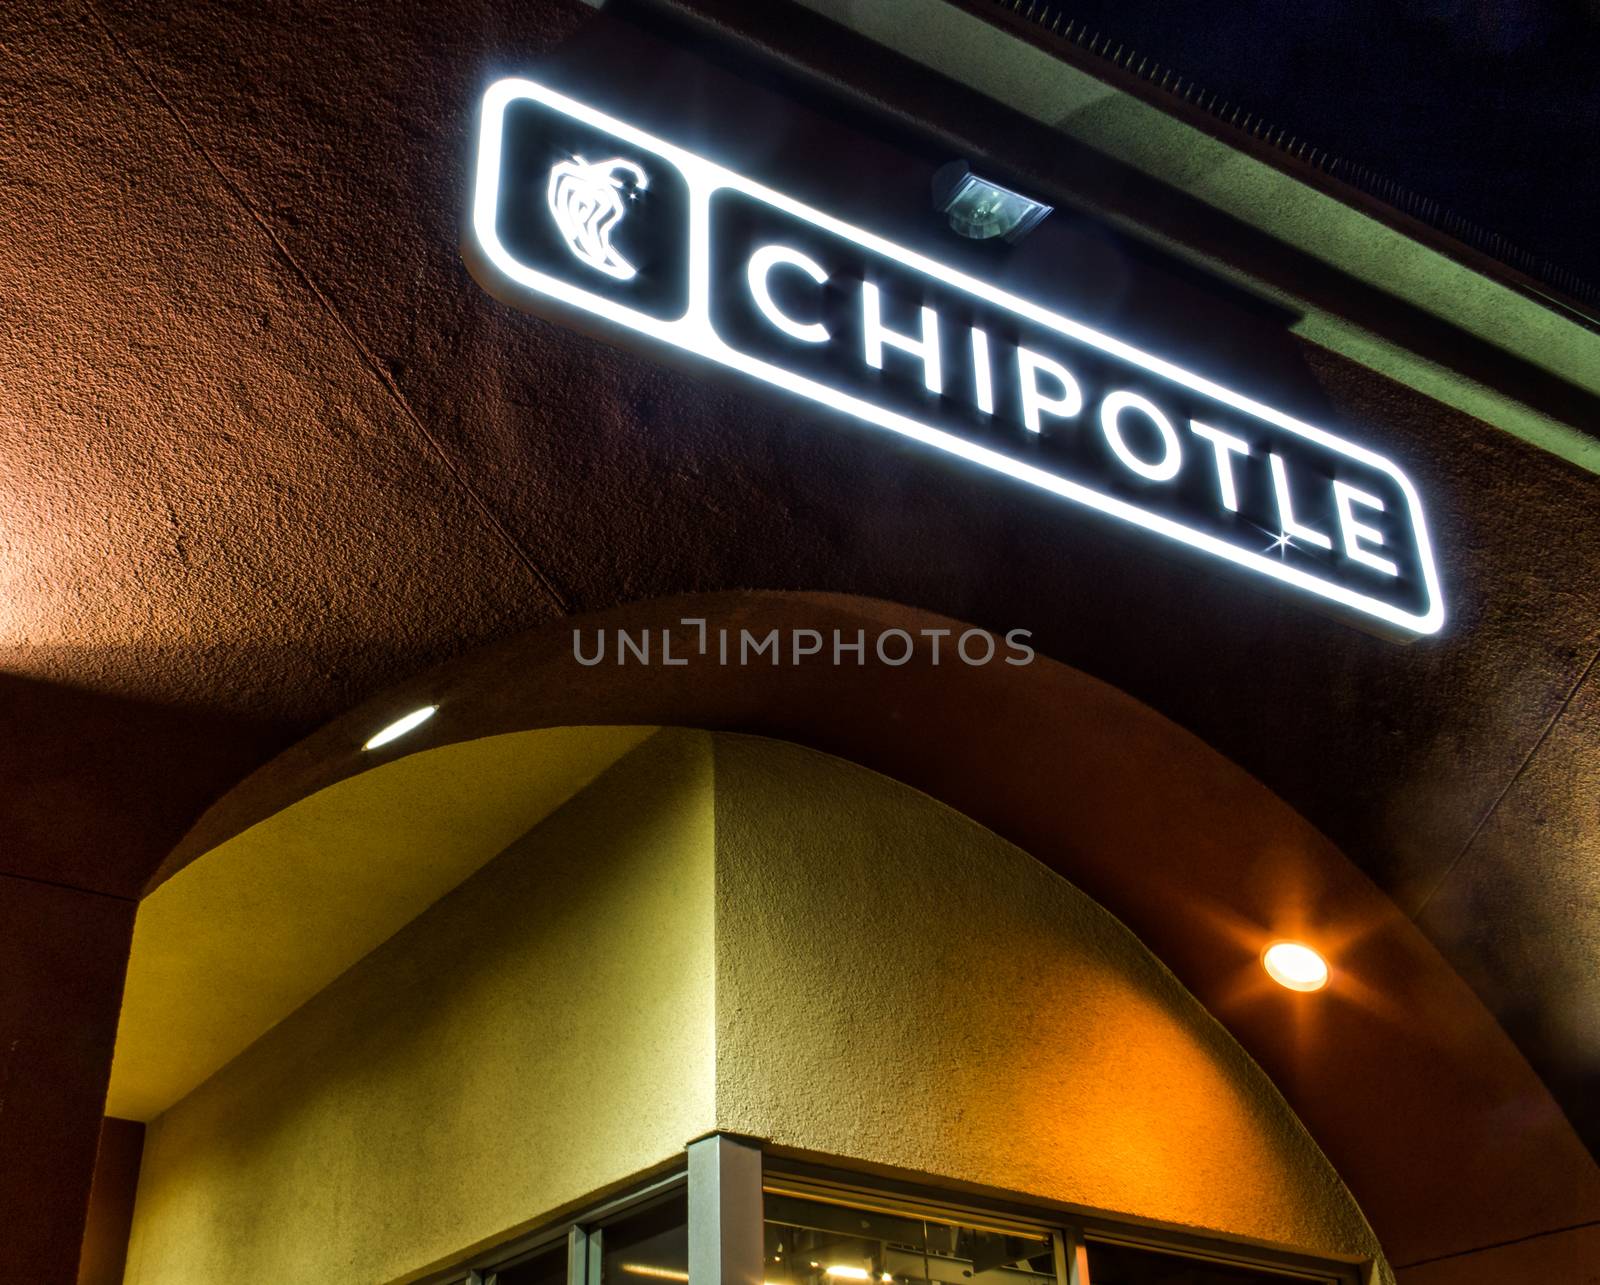 WESTMINSTER, CA/USA - NOVEMBER 10, 2014: Chipolte Mexican Grill Sign. Chipolte is a chain of  casual dining restaurants specializing in burritos and tacos.